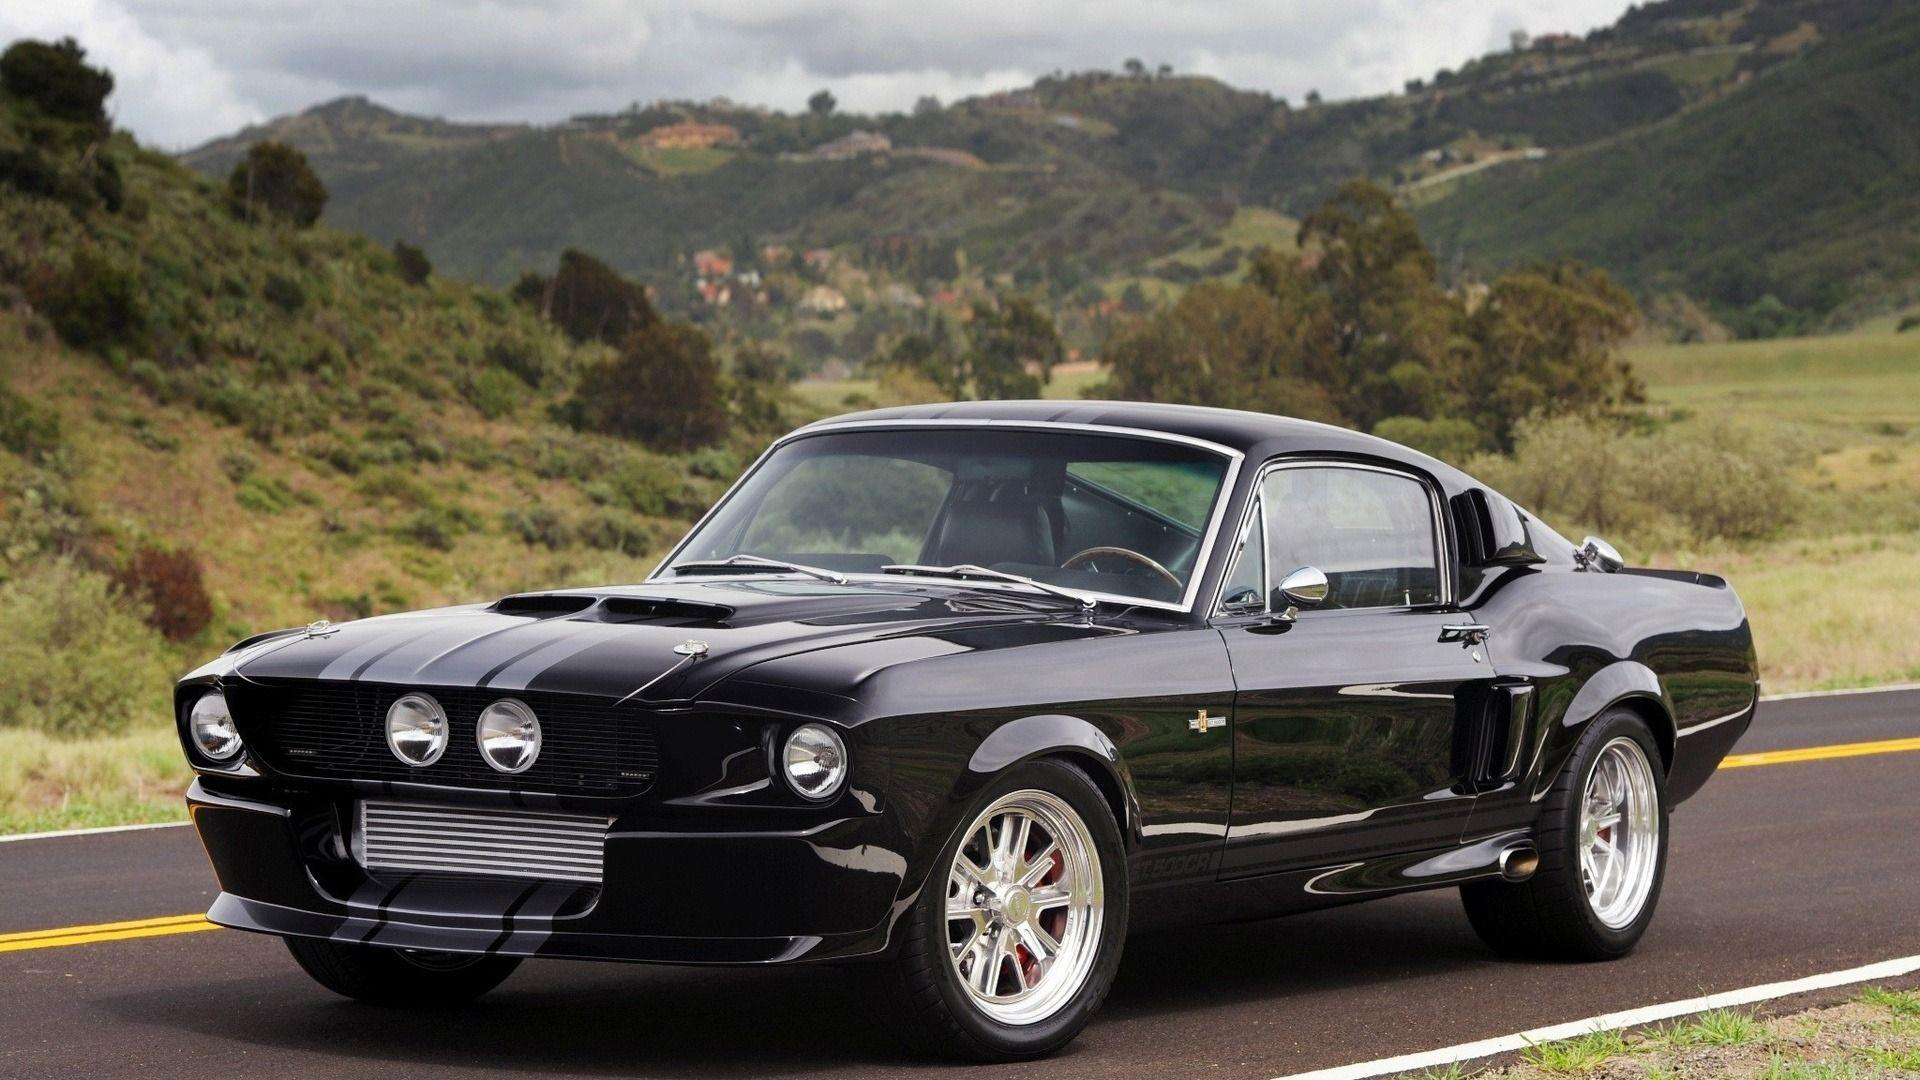 Ford Mustang 1967 HD Wallpaper, Background Image